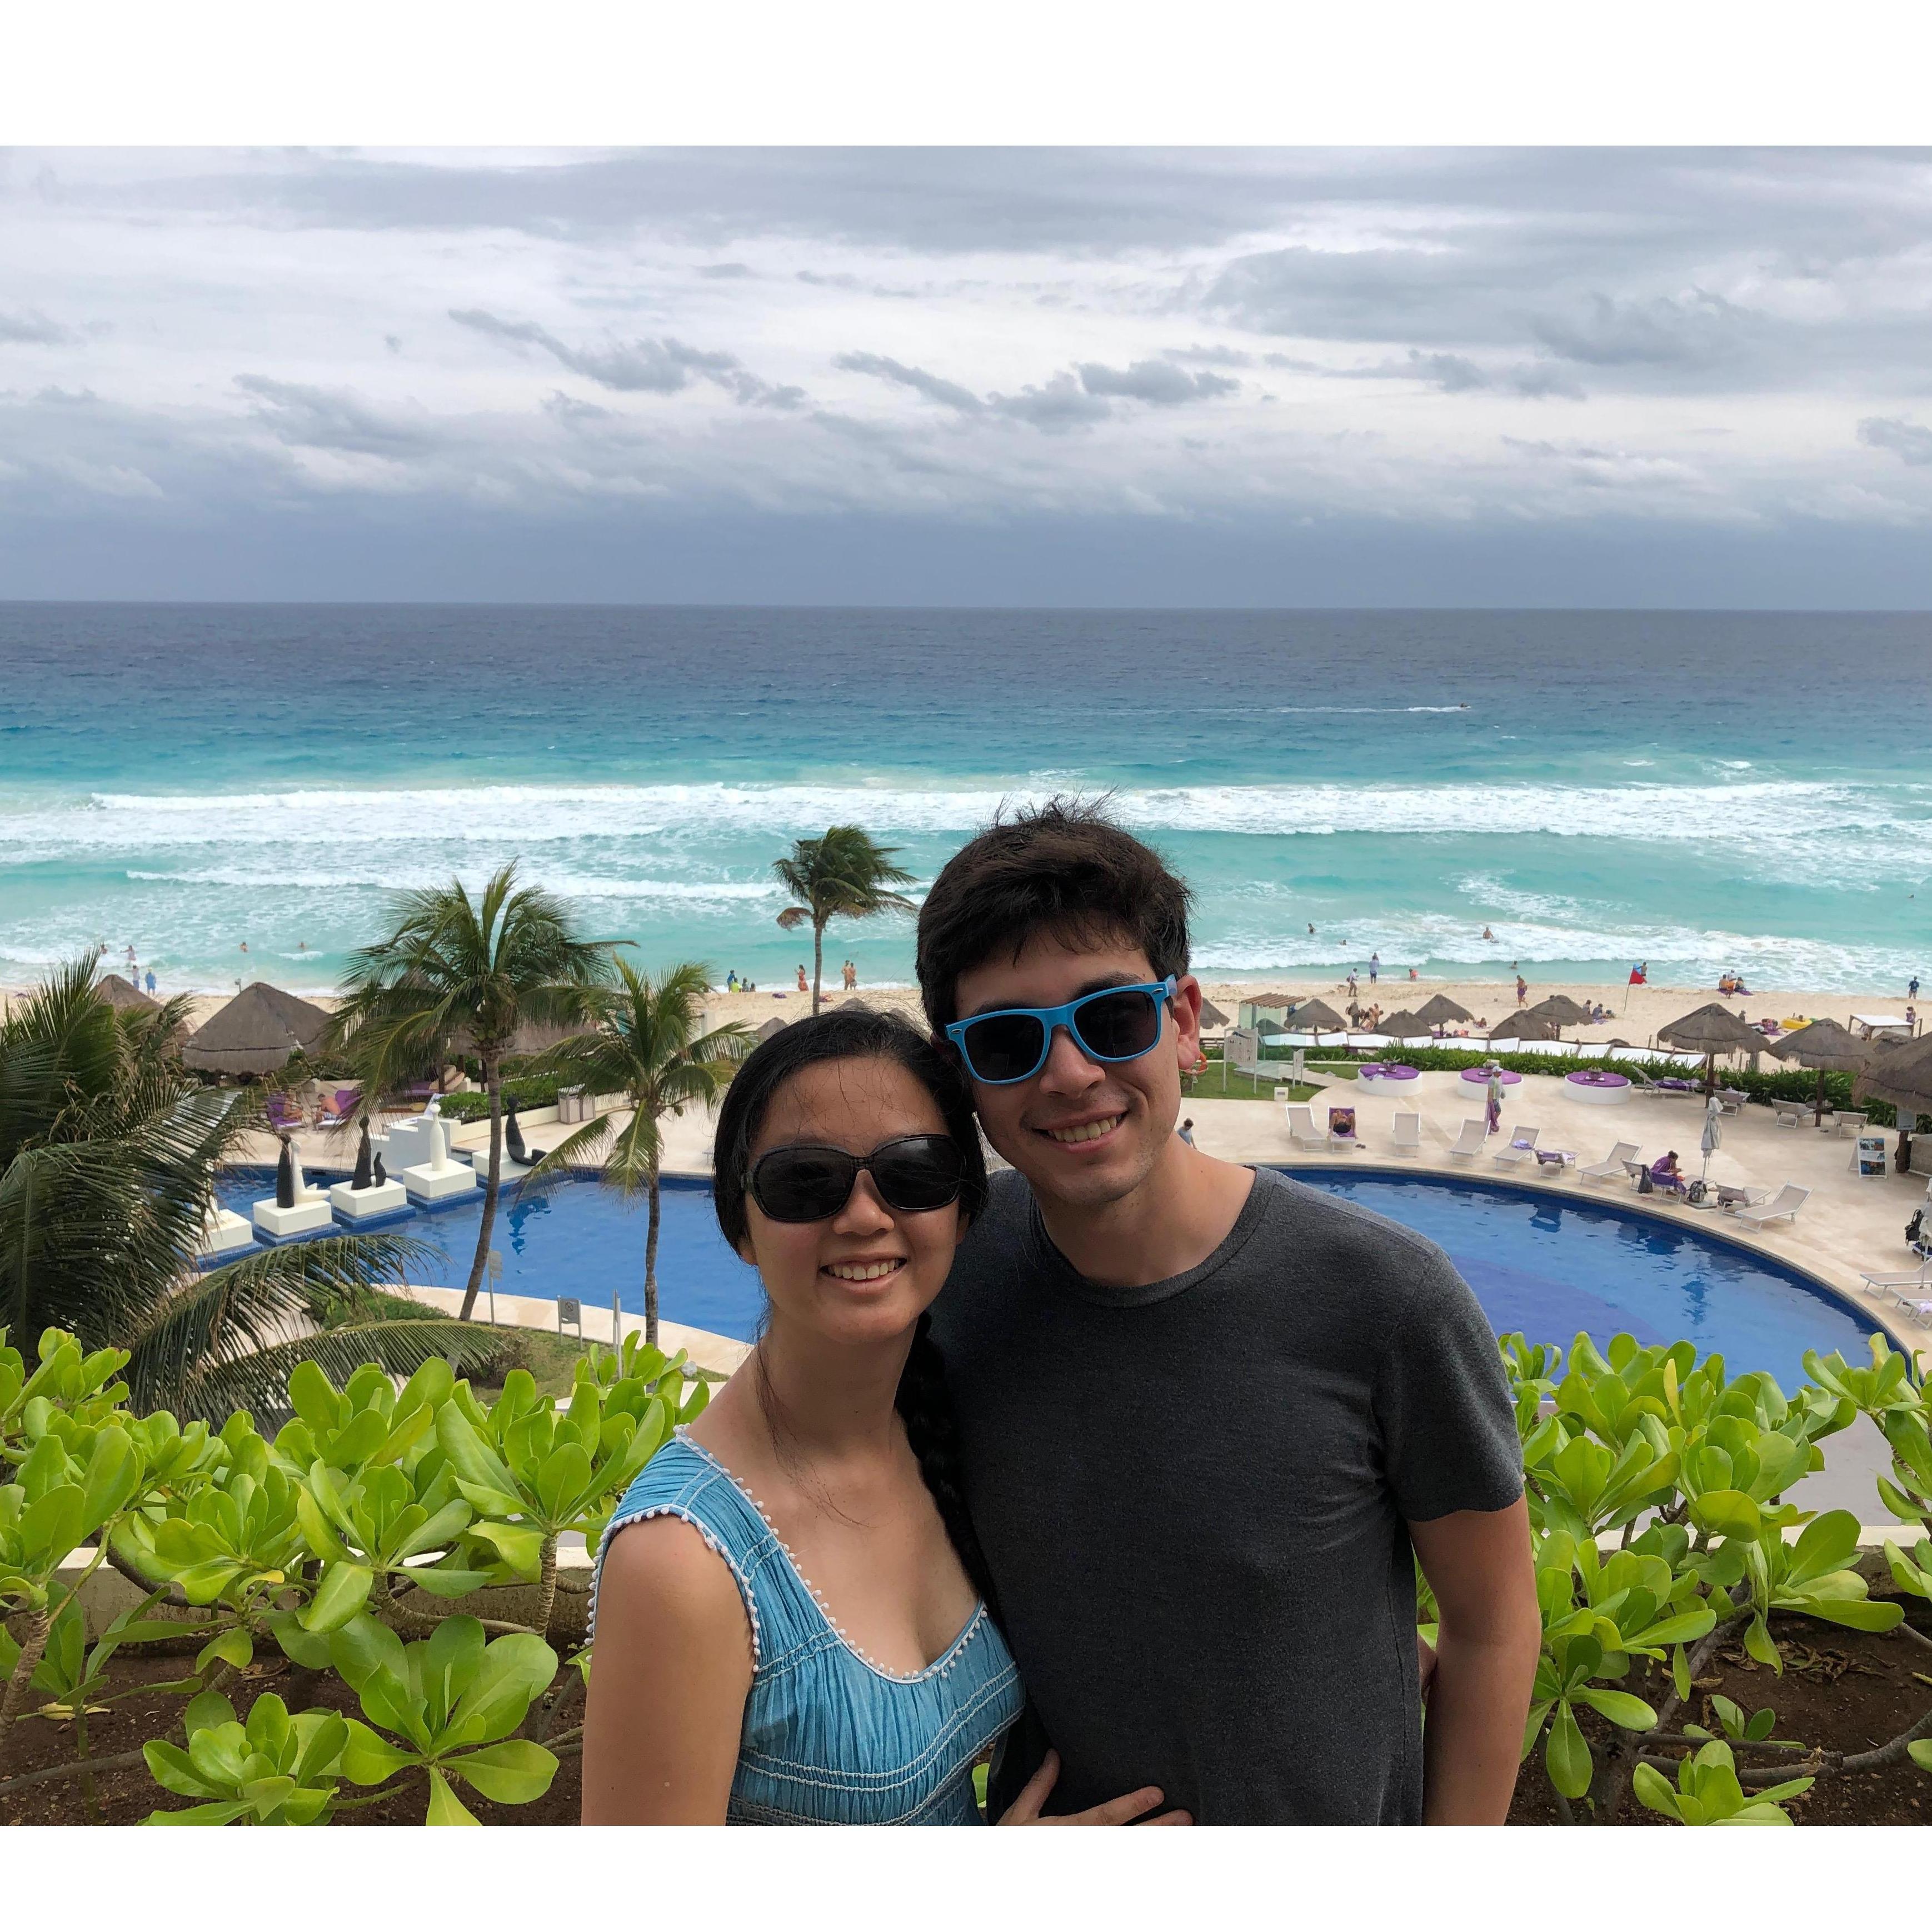 On our balcony at the resort in Cancun, Mexico (December 2018)